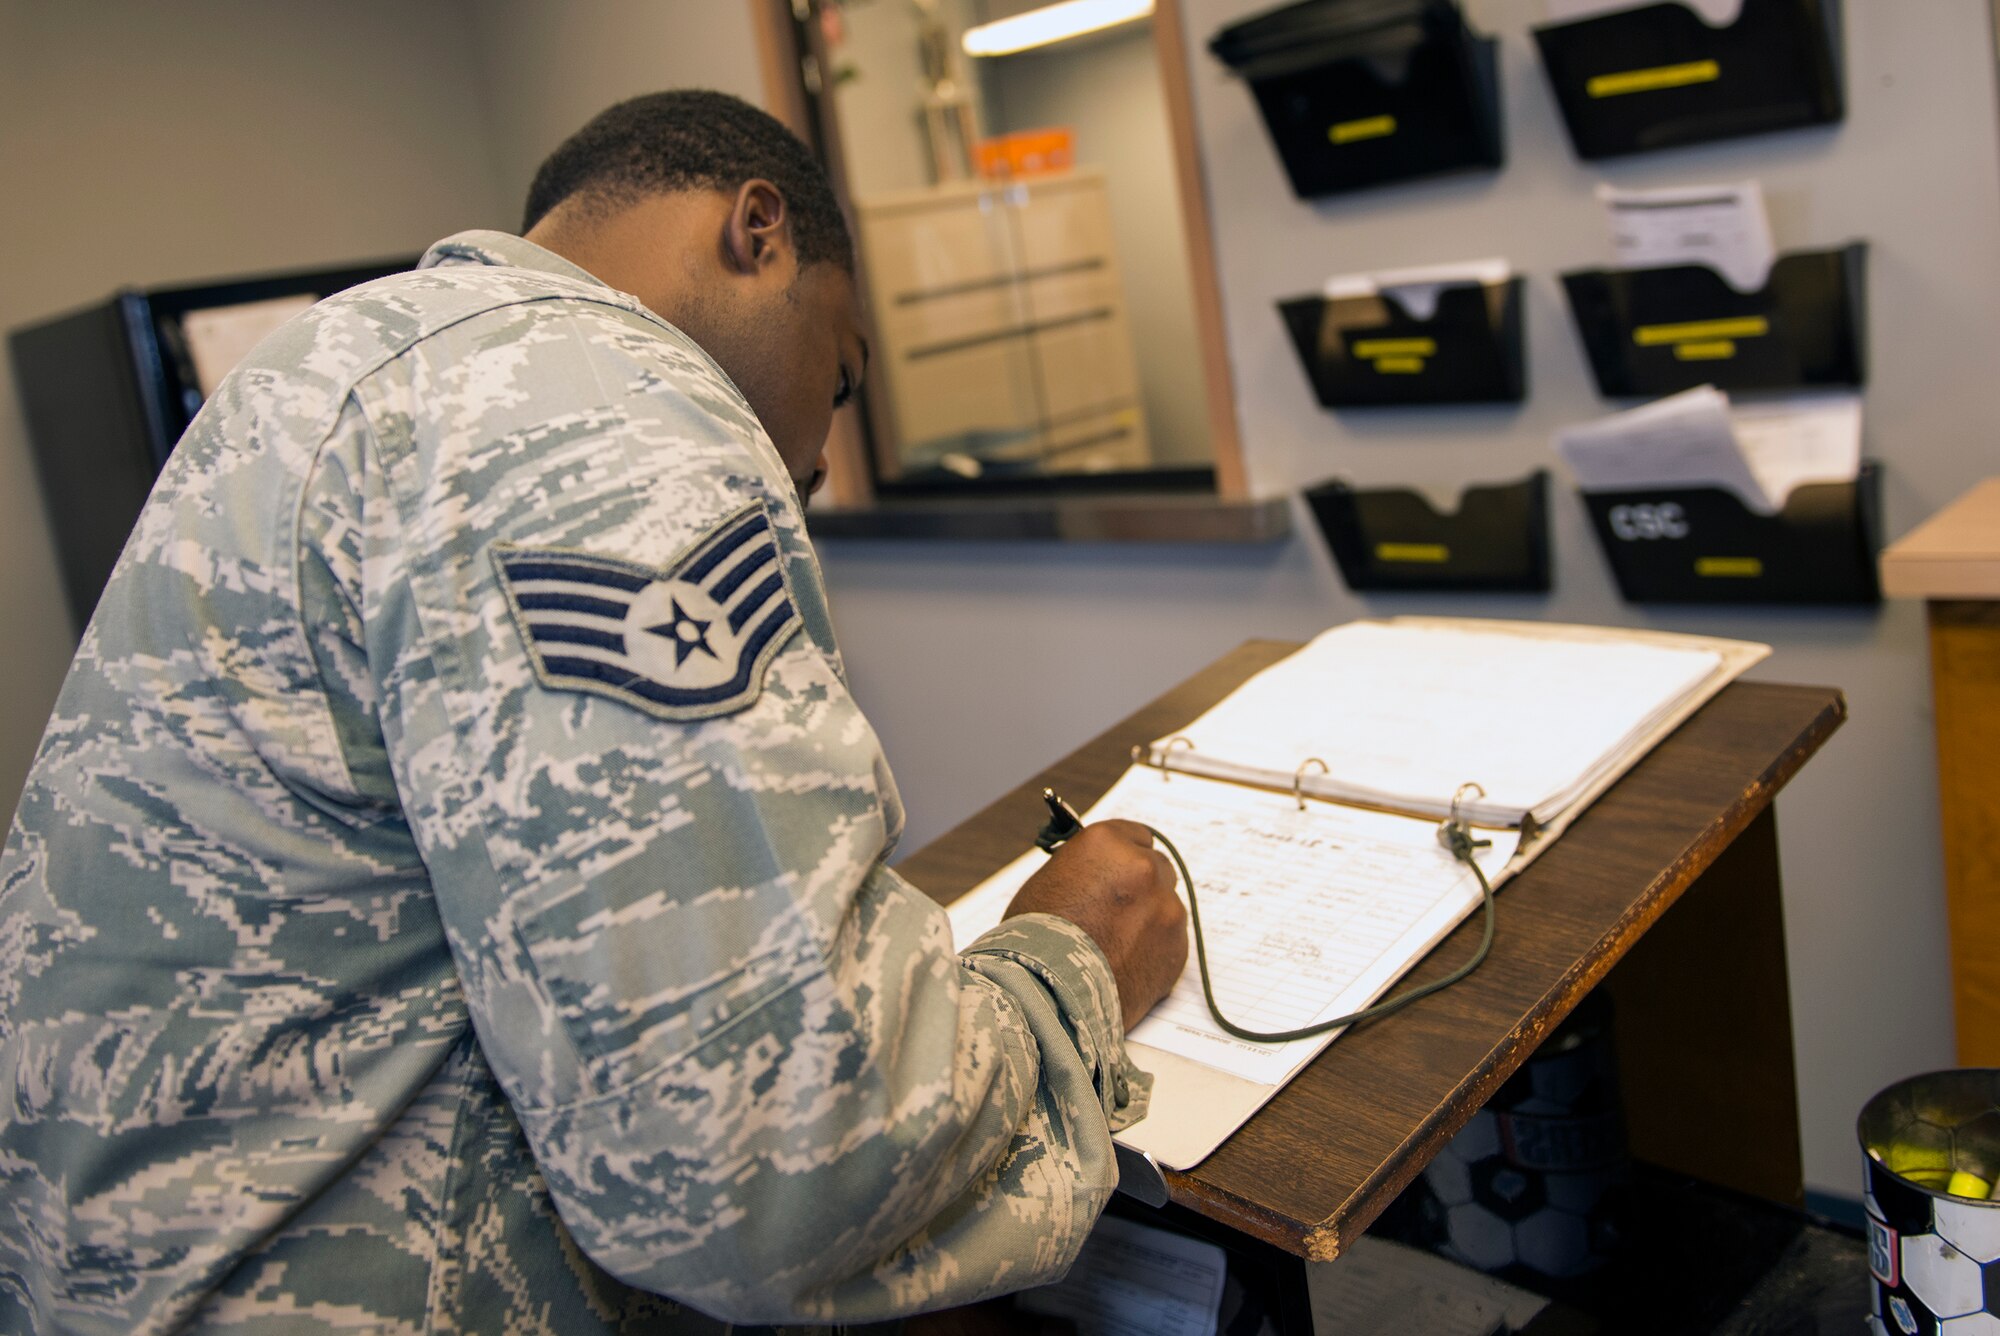 U.S. Air Force Staff Sgt. Donald Henderson, 23d Logistics Readiness Squadron individual protection craftsman, signs into the 23d LRS Vehicle Management Flight’s customer service vehicle pick-up and return log Aug. 11, 2015, at Moody Air Force Base, Ga.  The customer service section shop is the vehicle turn in center and is responsible for tracking and accounting all scheduled maintenance on vehicle assets. (U.S. Air Force photo by Airman 1st Class Greg Nash/Released) 